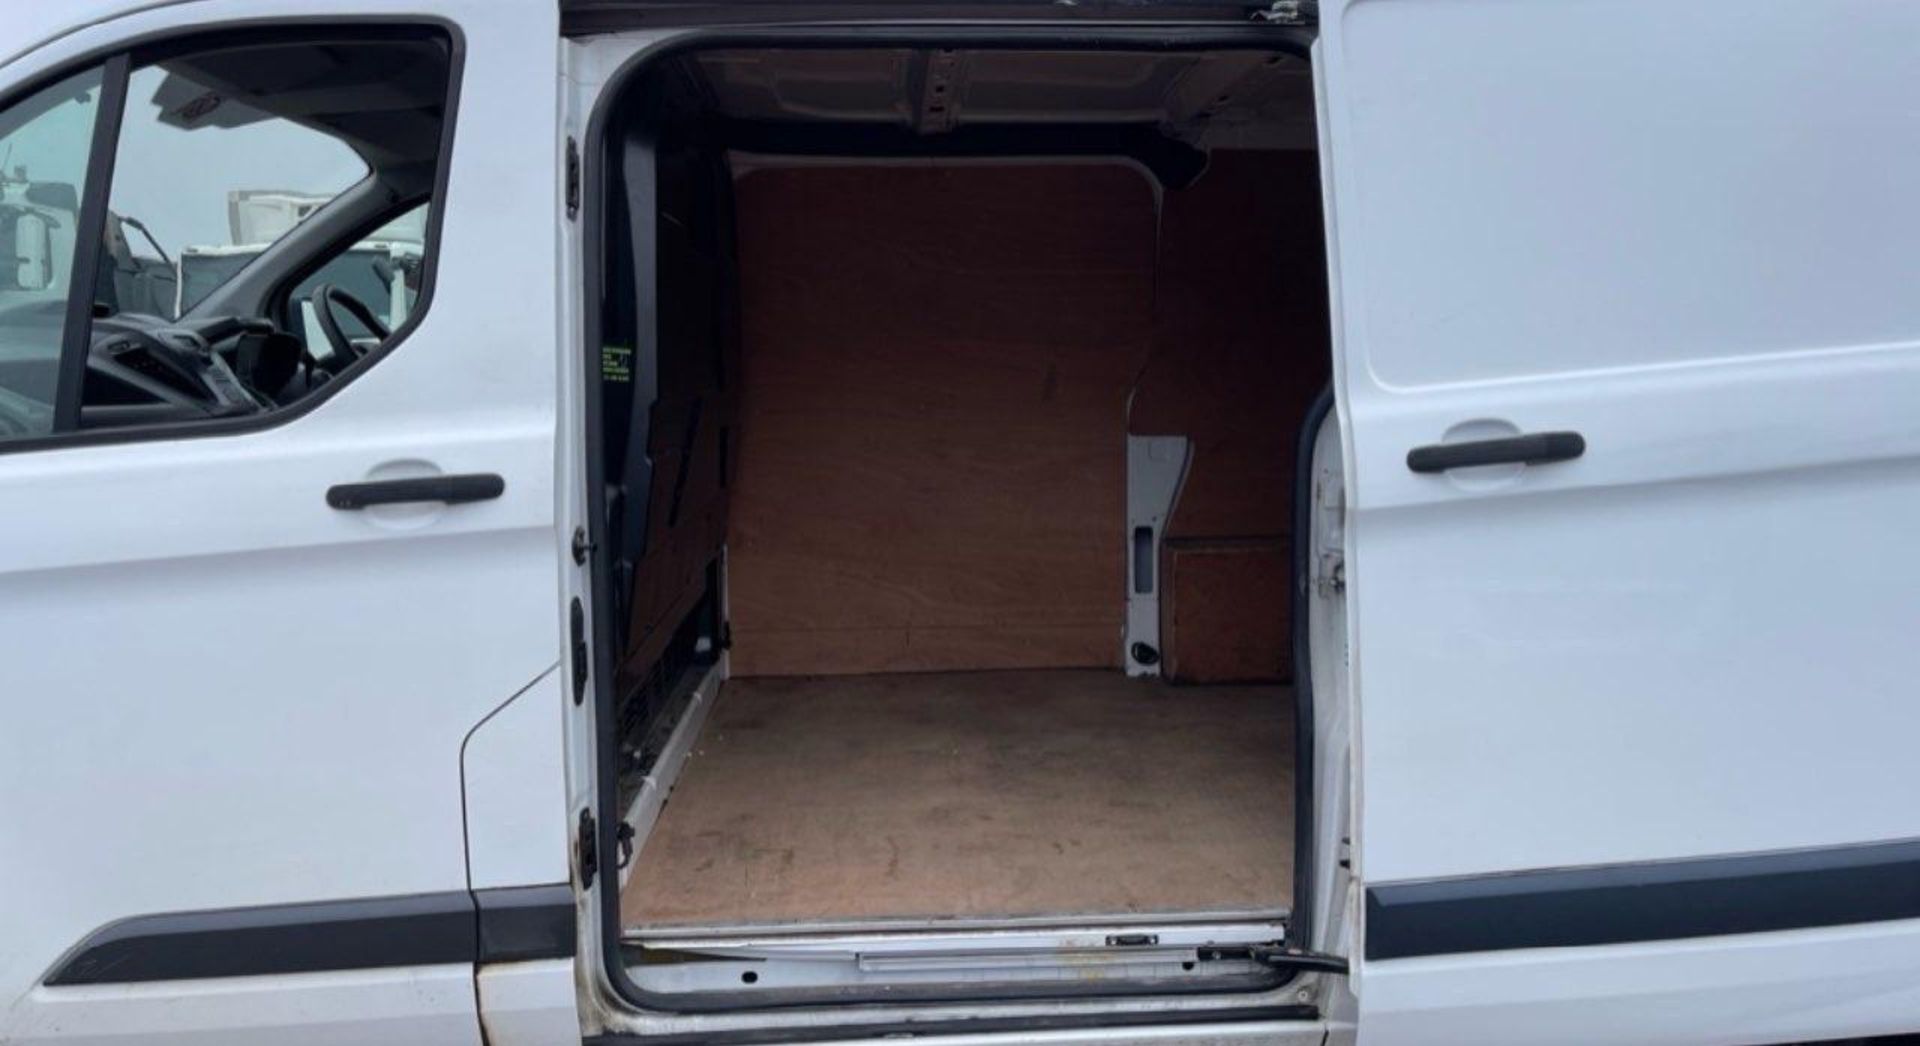 2015 FORD TRANSIT CUSTOM PANEL VAN - RELIABLE AND EFFICIENT WORKHORSE - Image 16 of 17